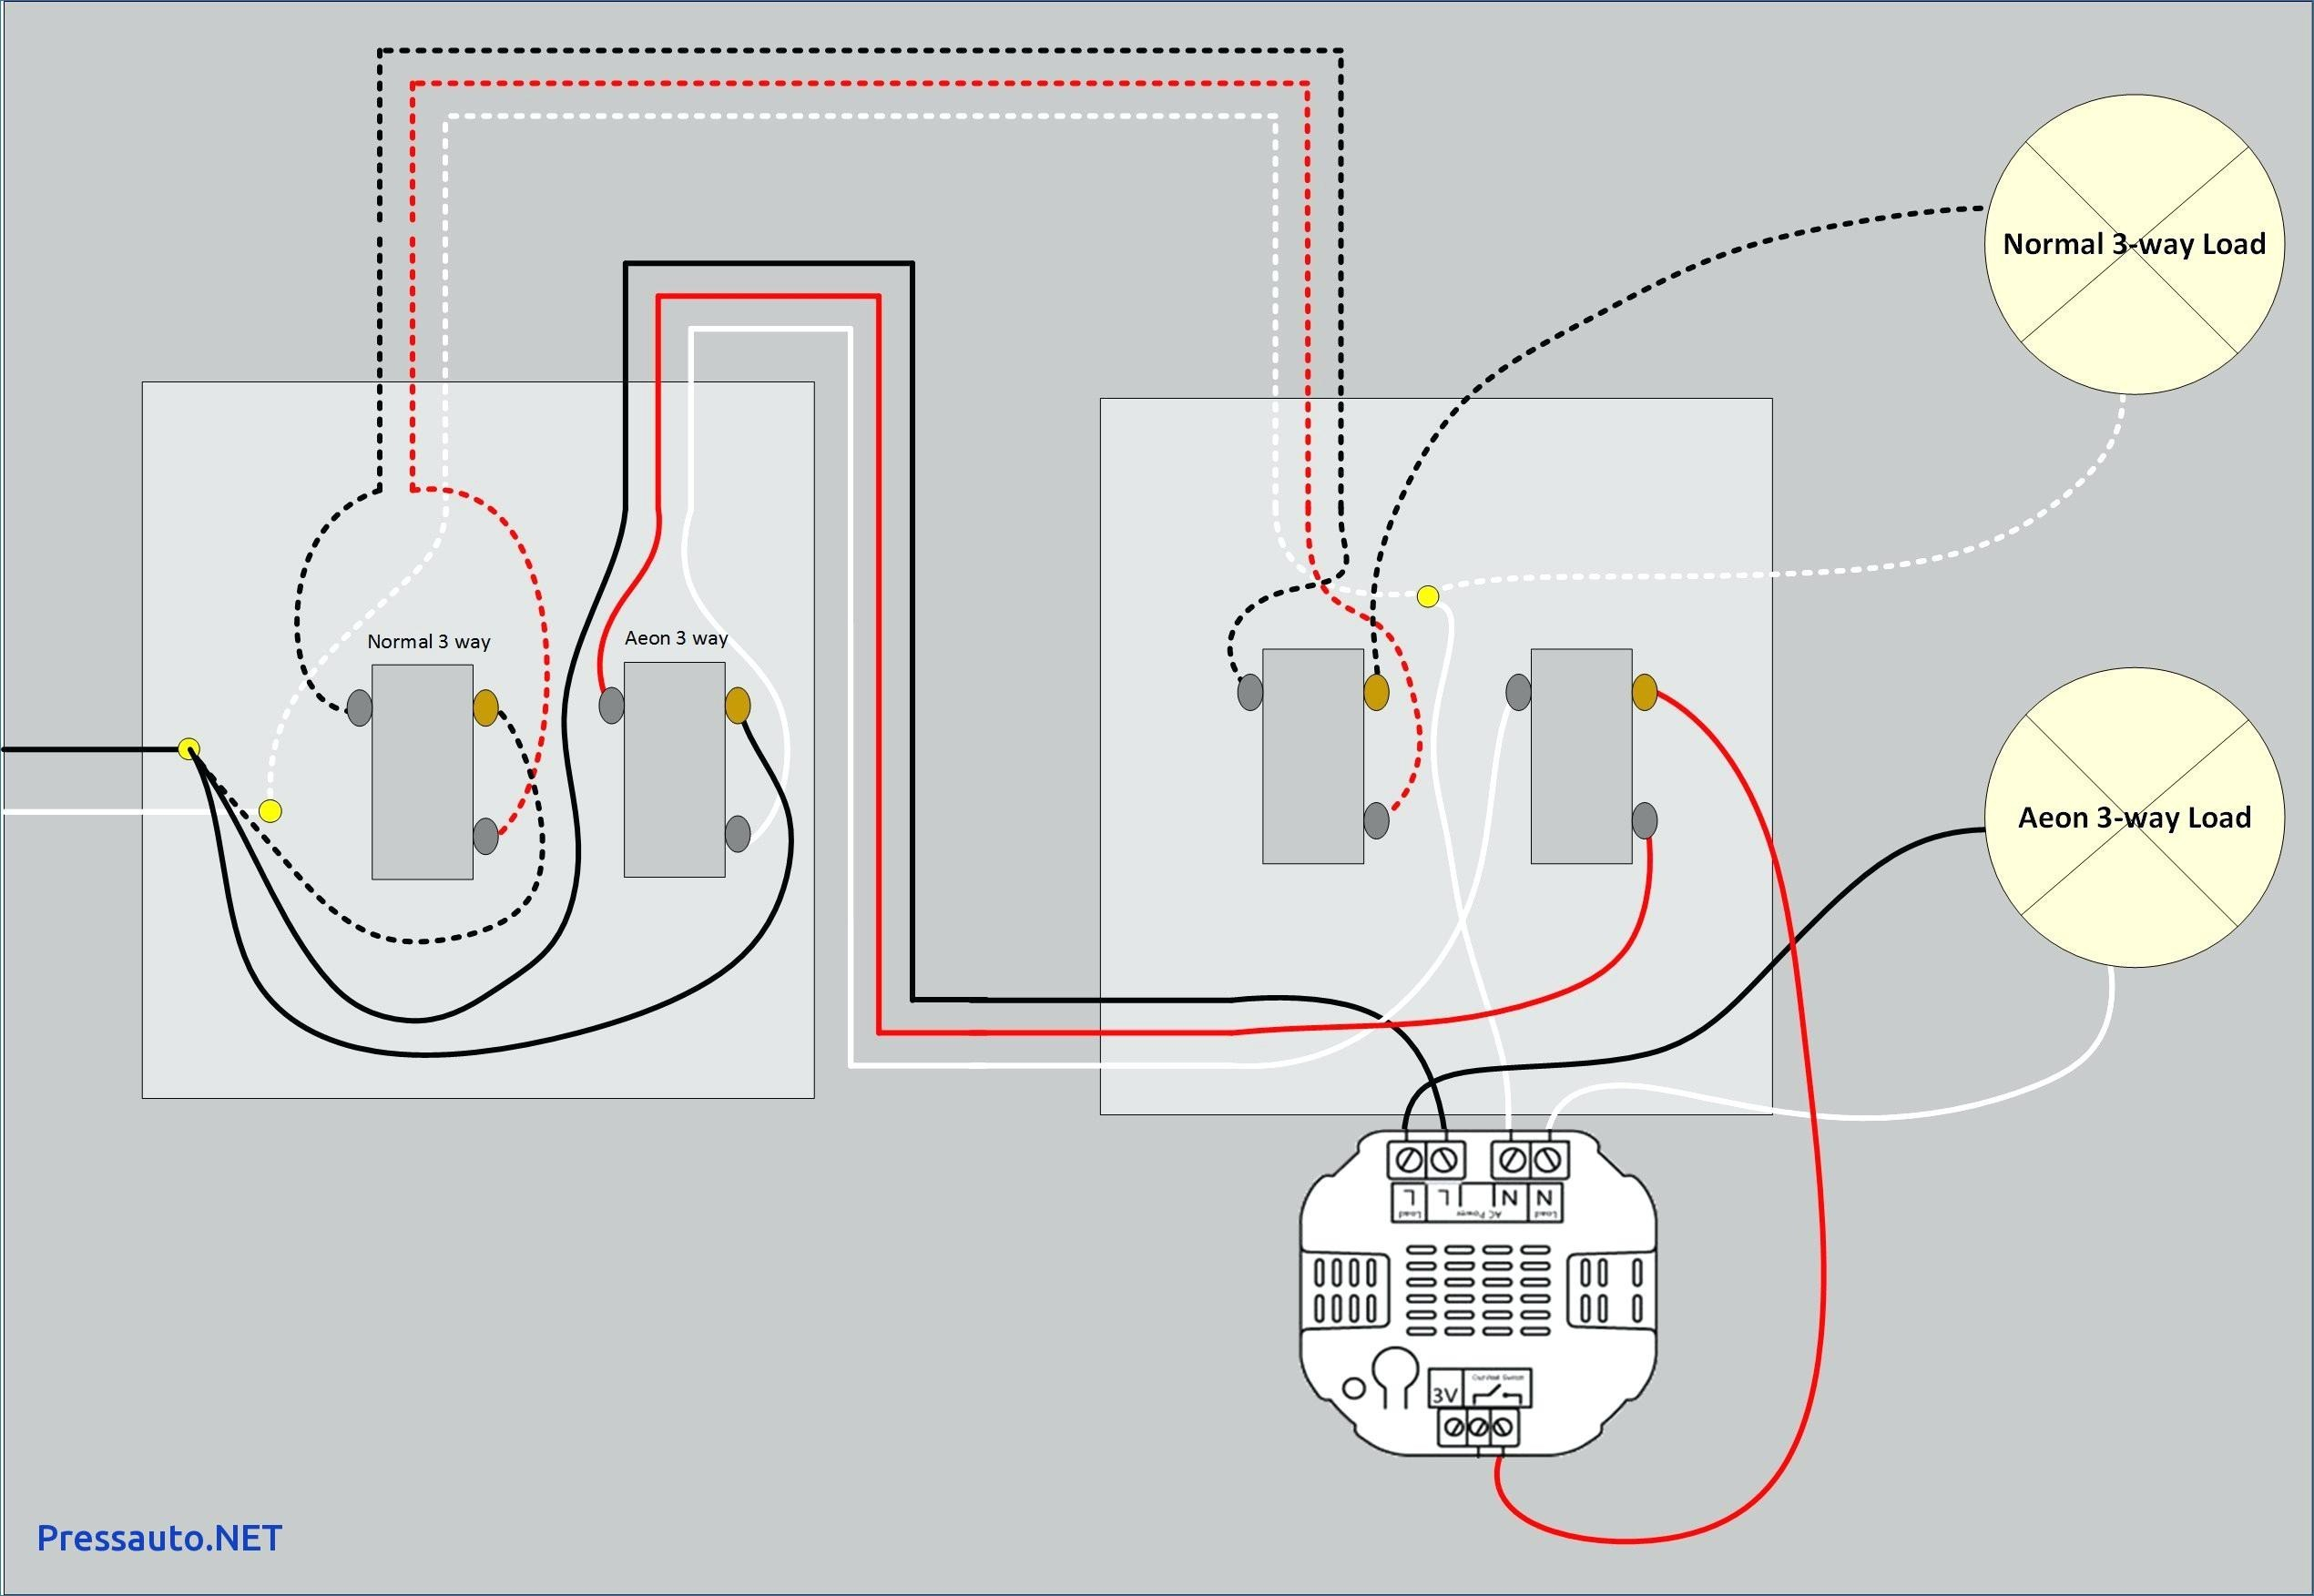 4 Way Switch Diagram Way And 4 Way Switch Wiring For Residential Lighting Tom Remus